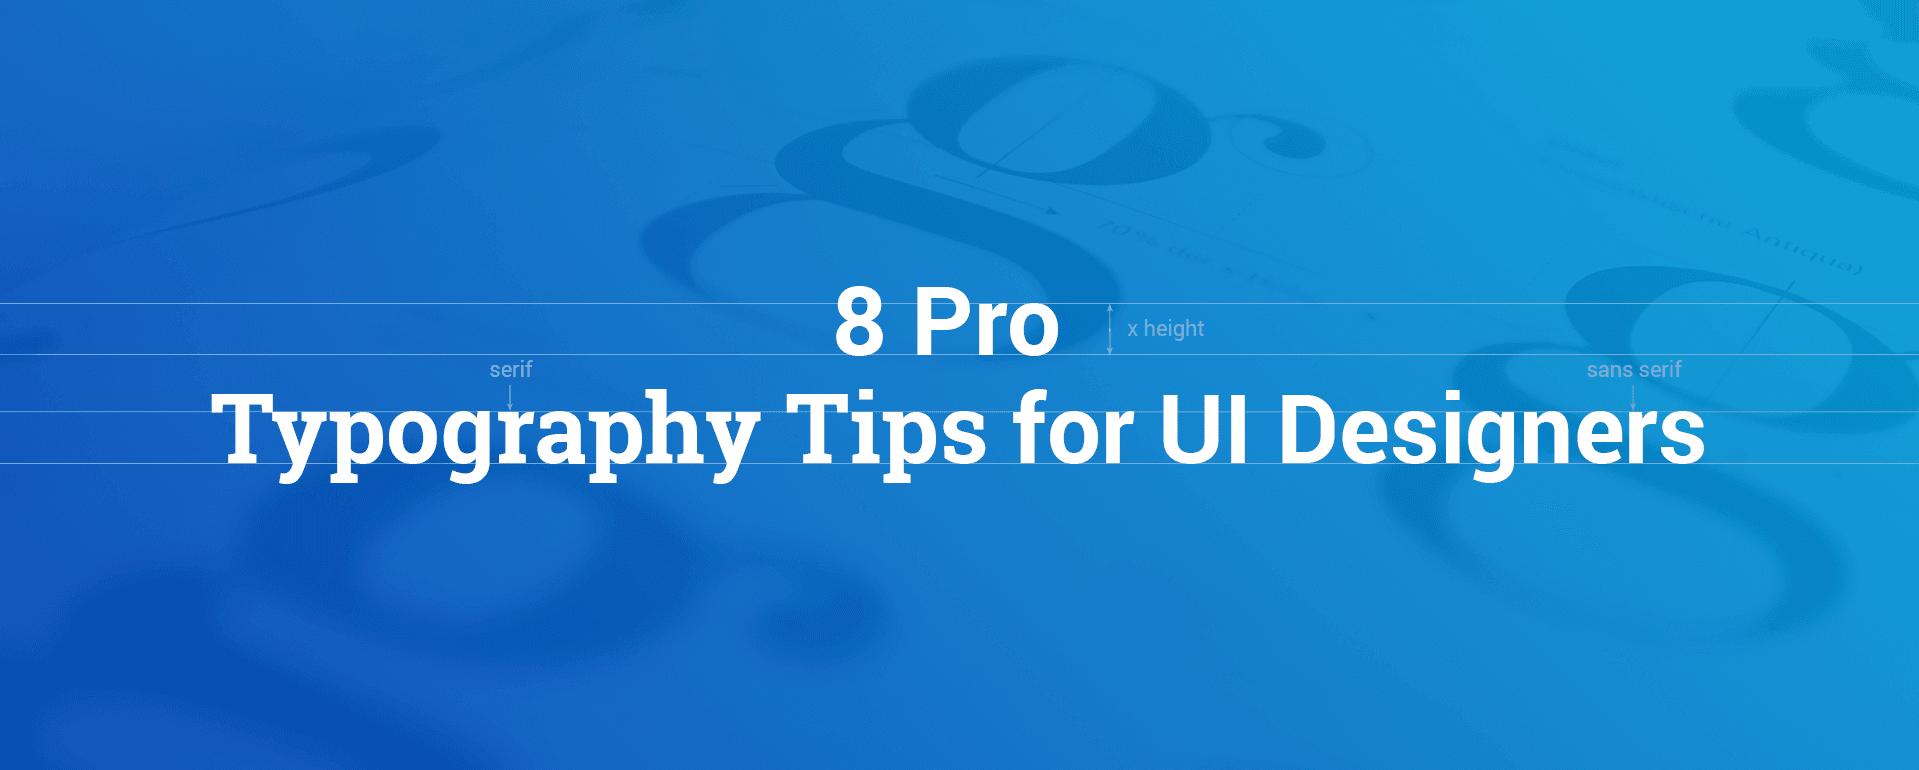 8 Pro Typography Tips for UI Designers